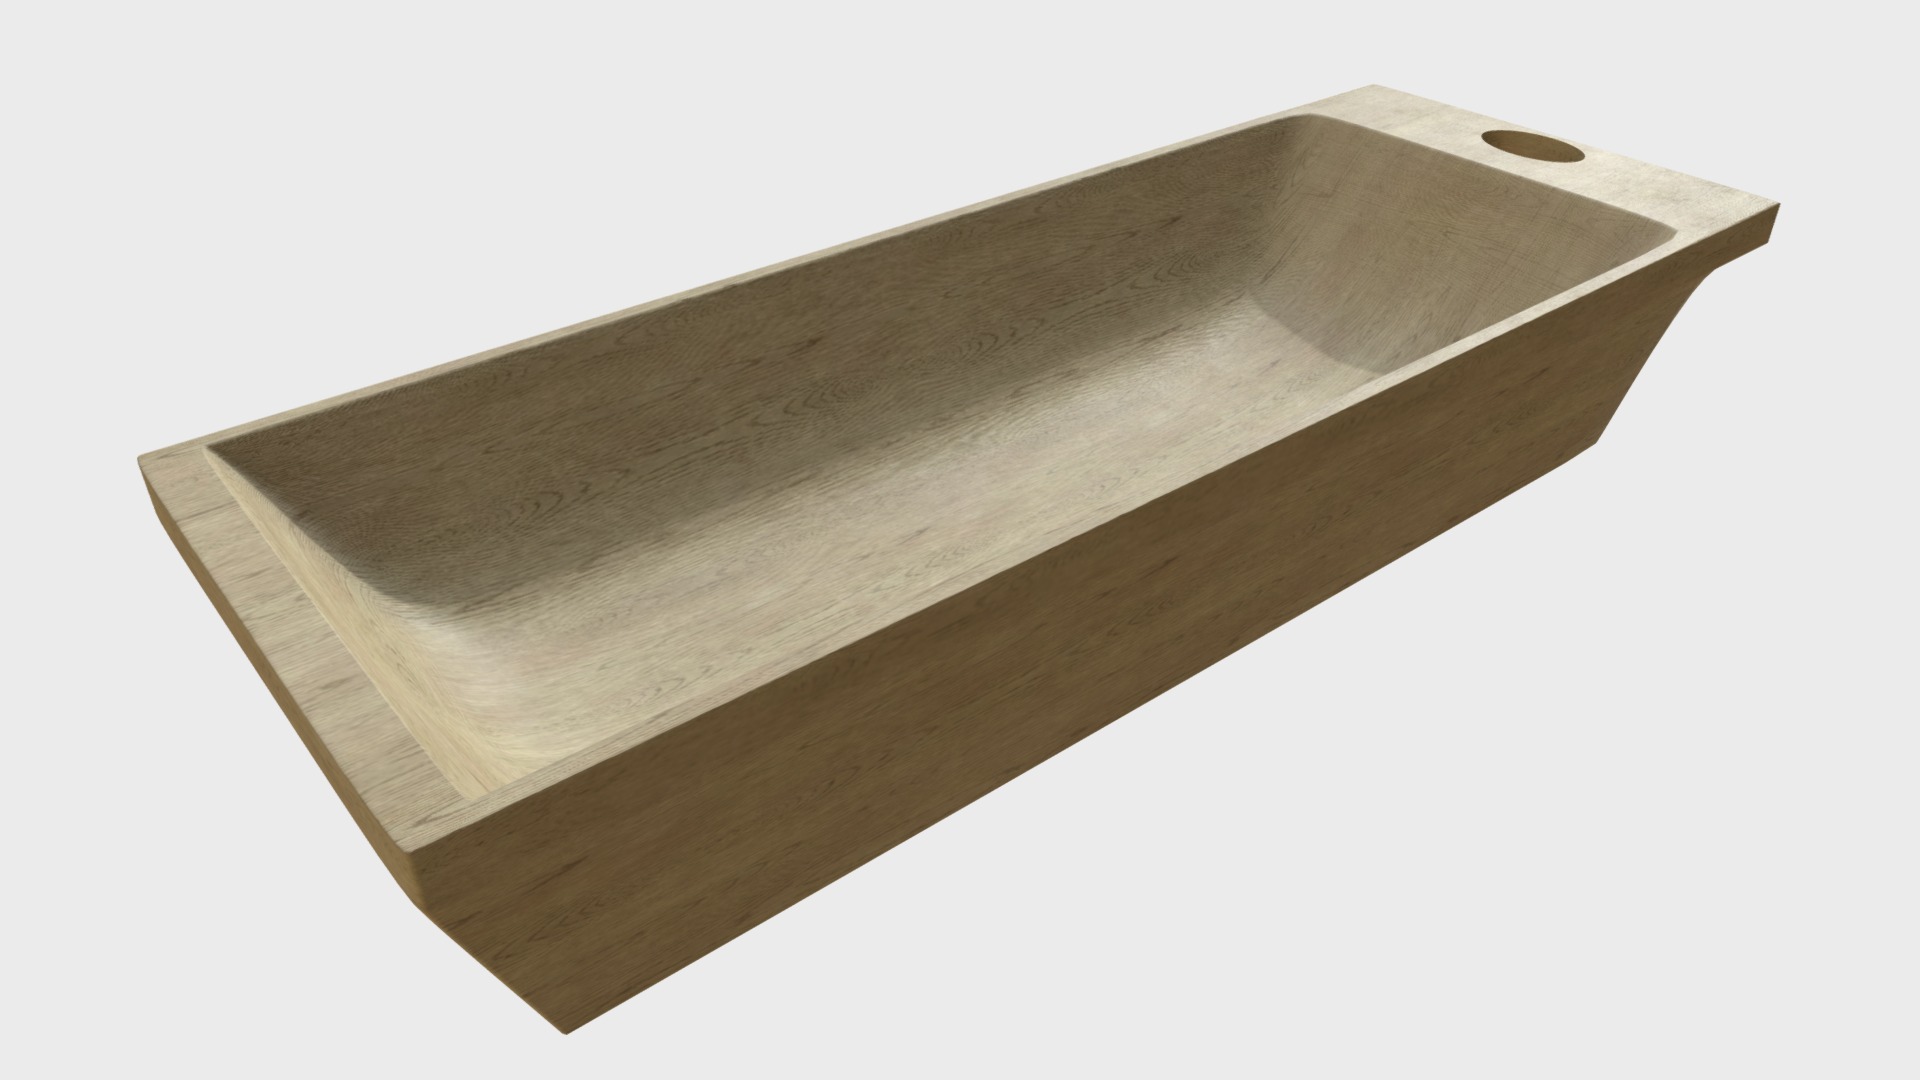 3D model Kneading trough - This is a 3D model of the Kneading trough. The 3D model is about a wooden block with a hole in it.